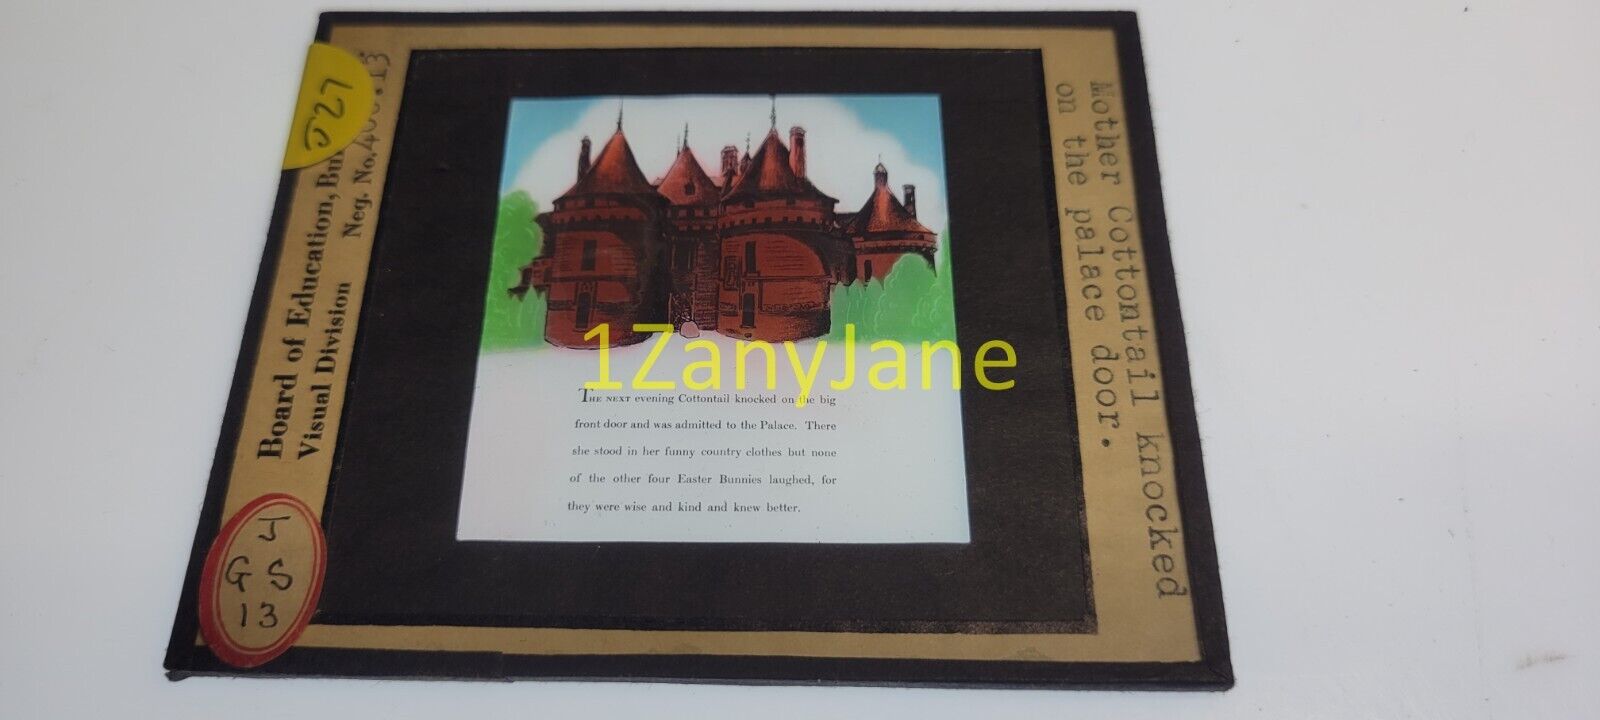 J27 HISTORIC Glass Magic Lantern Slide MOTHER COTTONTAIL KNOCKED ON THE PALACE